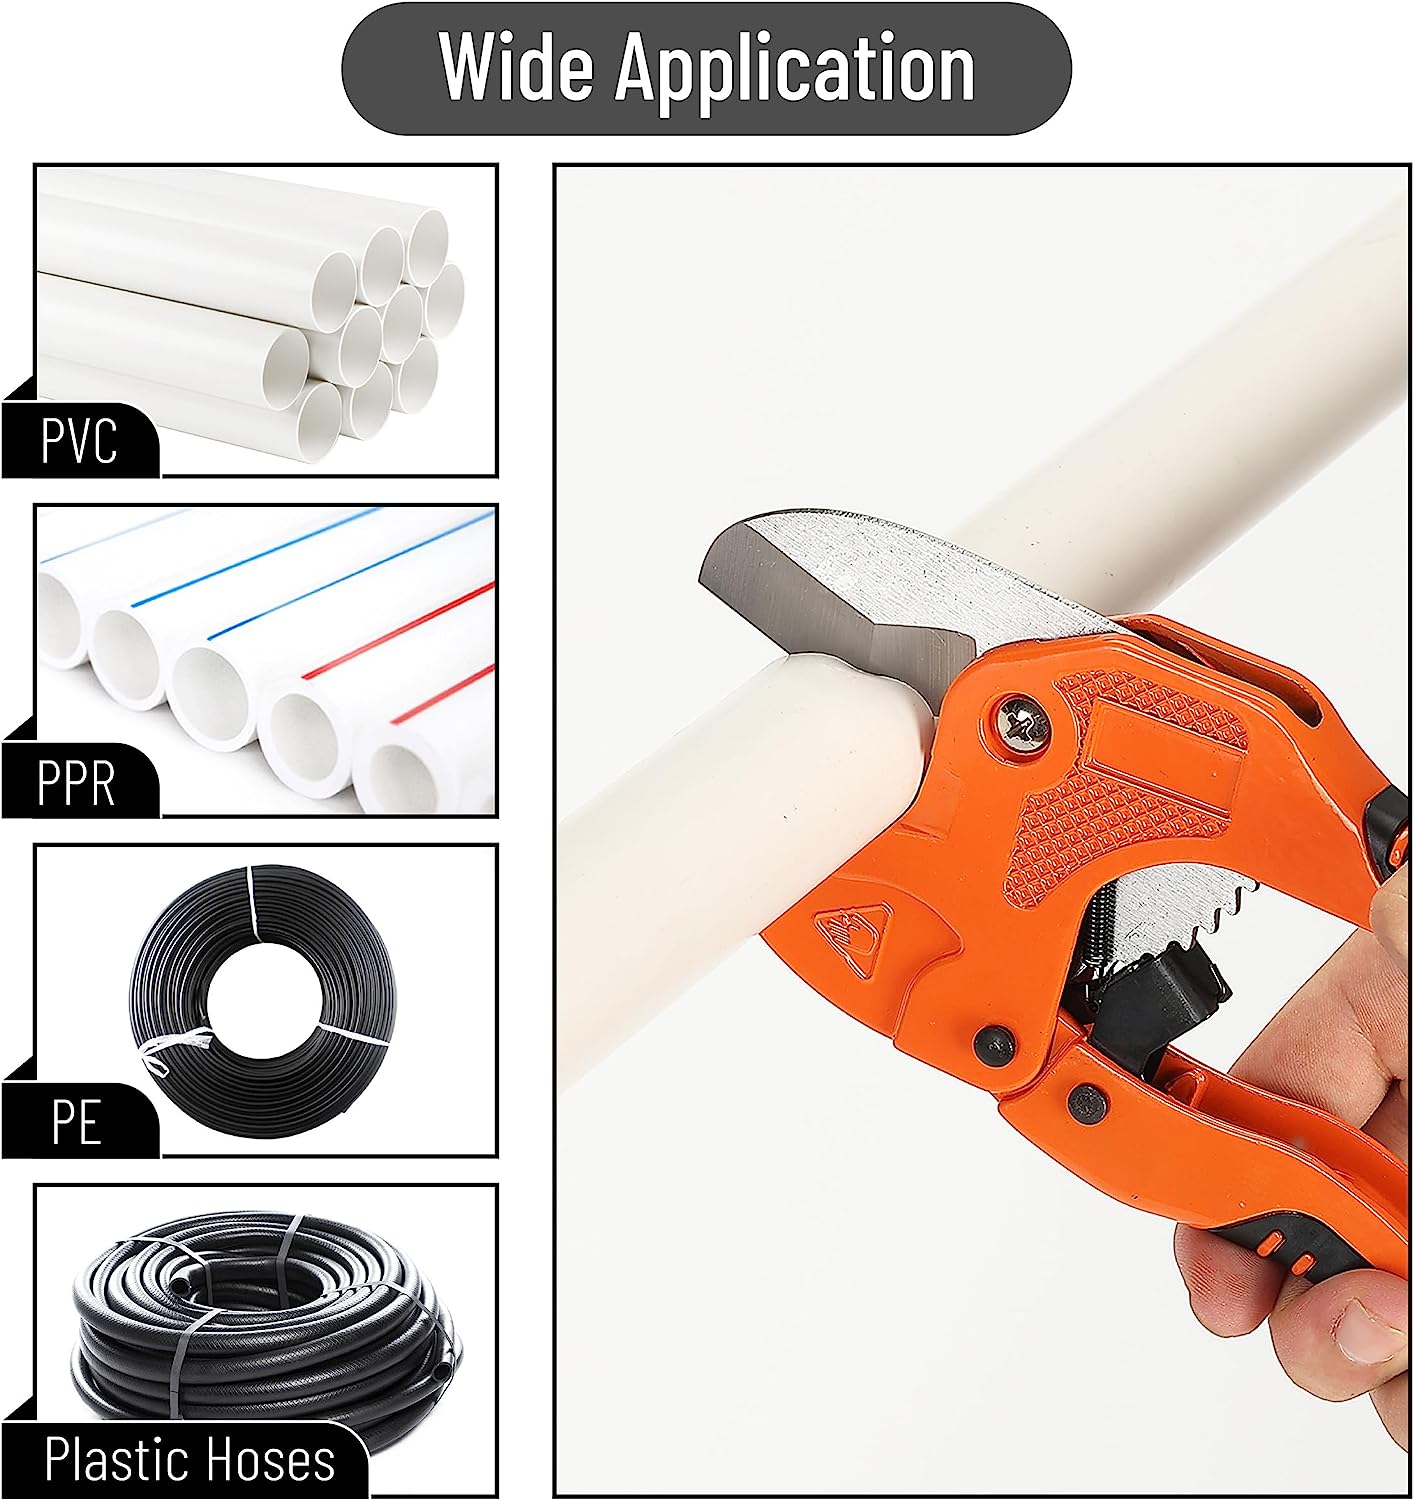 PVC Pipe Cutter, Cuts up to 1.5 Inch, Ratcheting PVC Pipe Cutter Tool, Pipe  Cutters PVC, PVC Pipe Shears, PVC Cutter, Plastic Pipe Cutter - Bates Choice